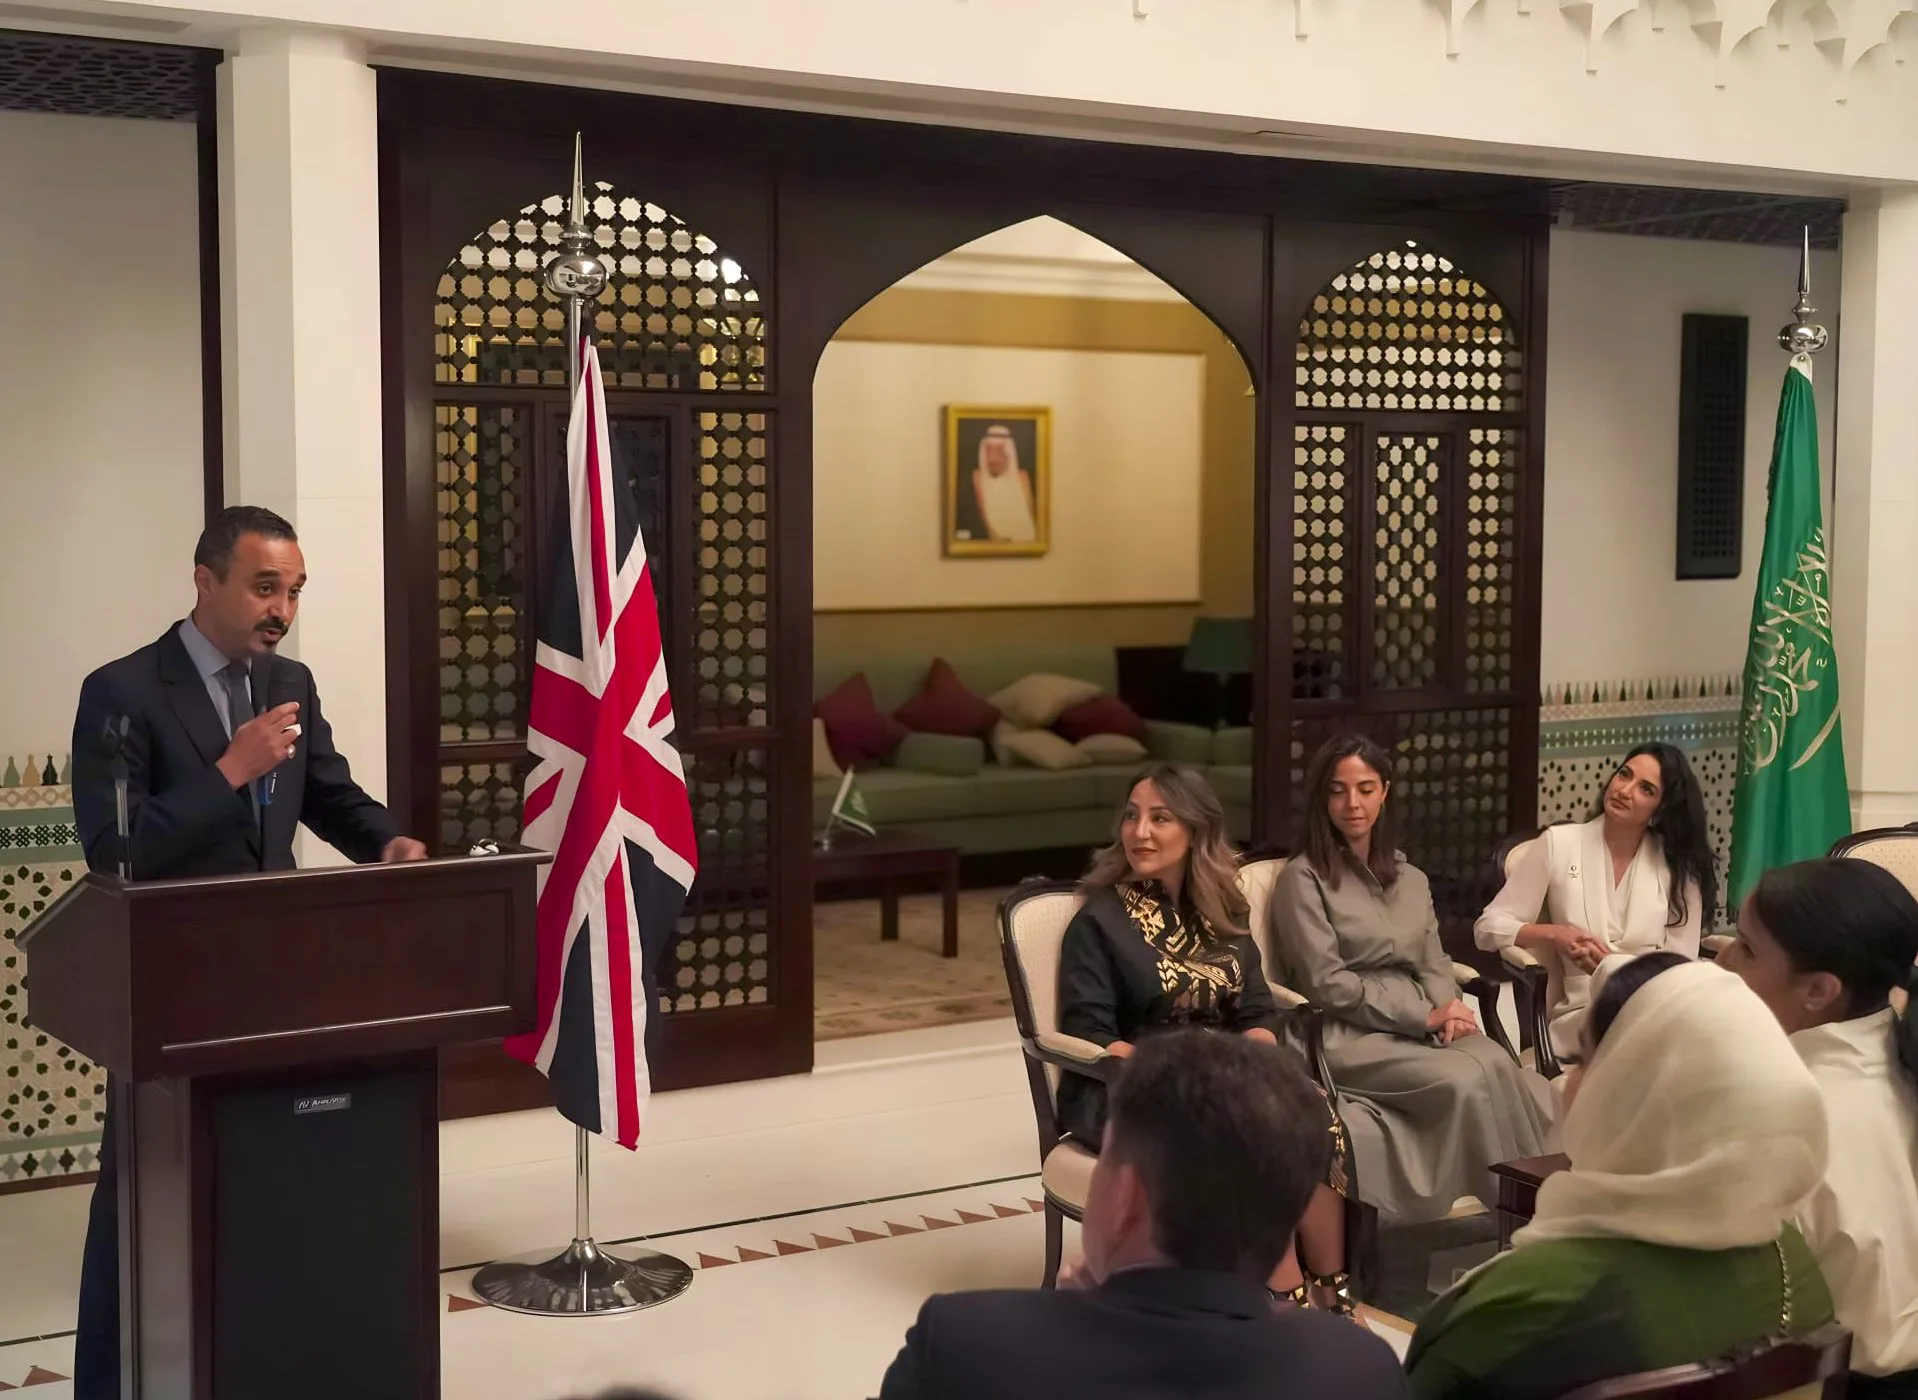 The Embassy of KSA in London collaborates with Jawhara Global, a British Foundation, to honour Saudi women's culture & arts.